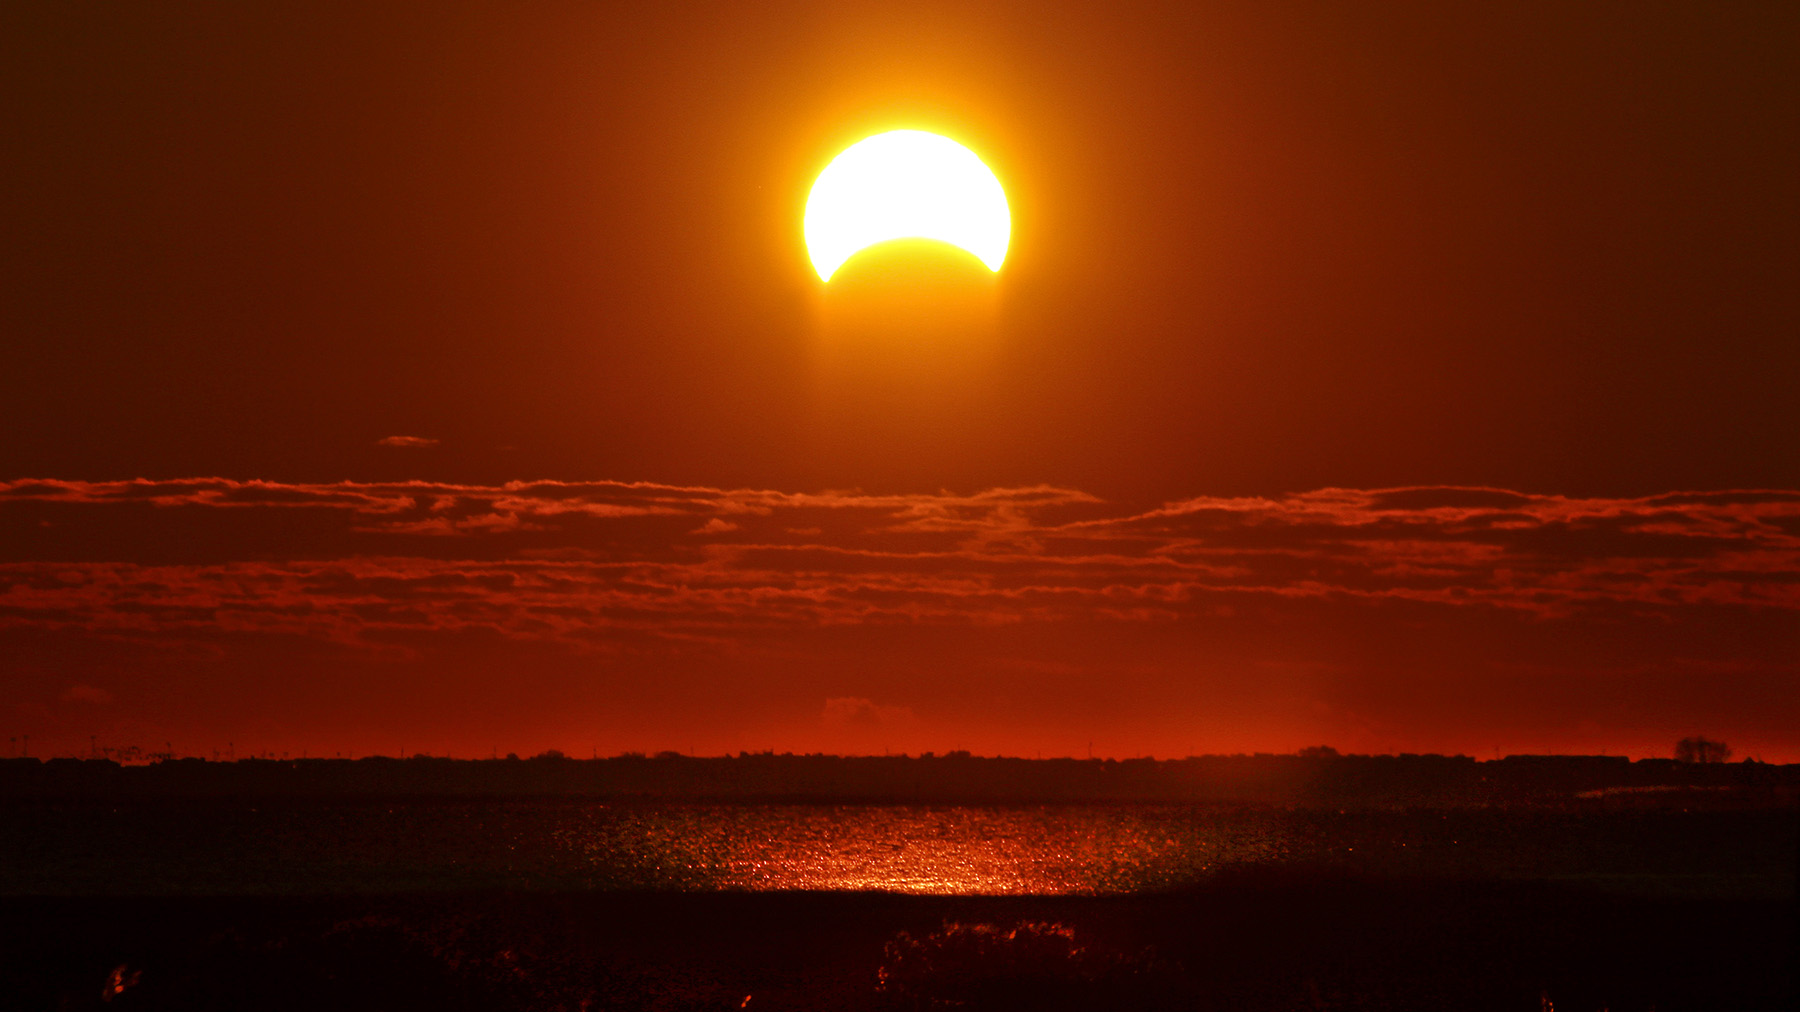 Stock photo of a partial eclipse over water (Creative Commons image, courtesy of RawPixel.com)